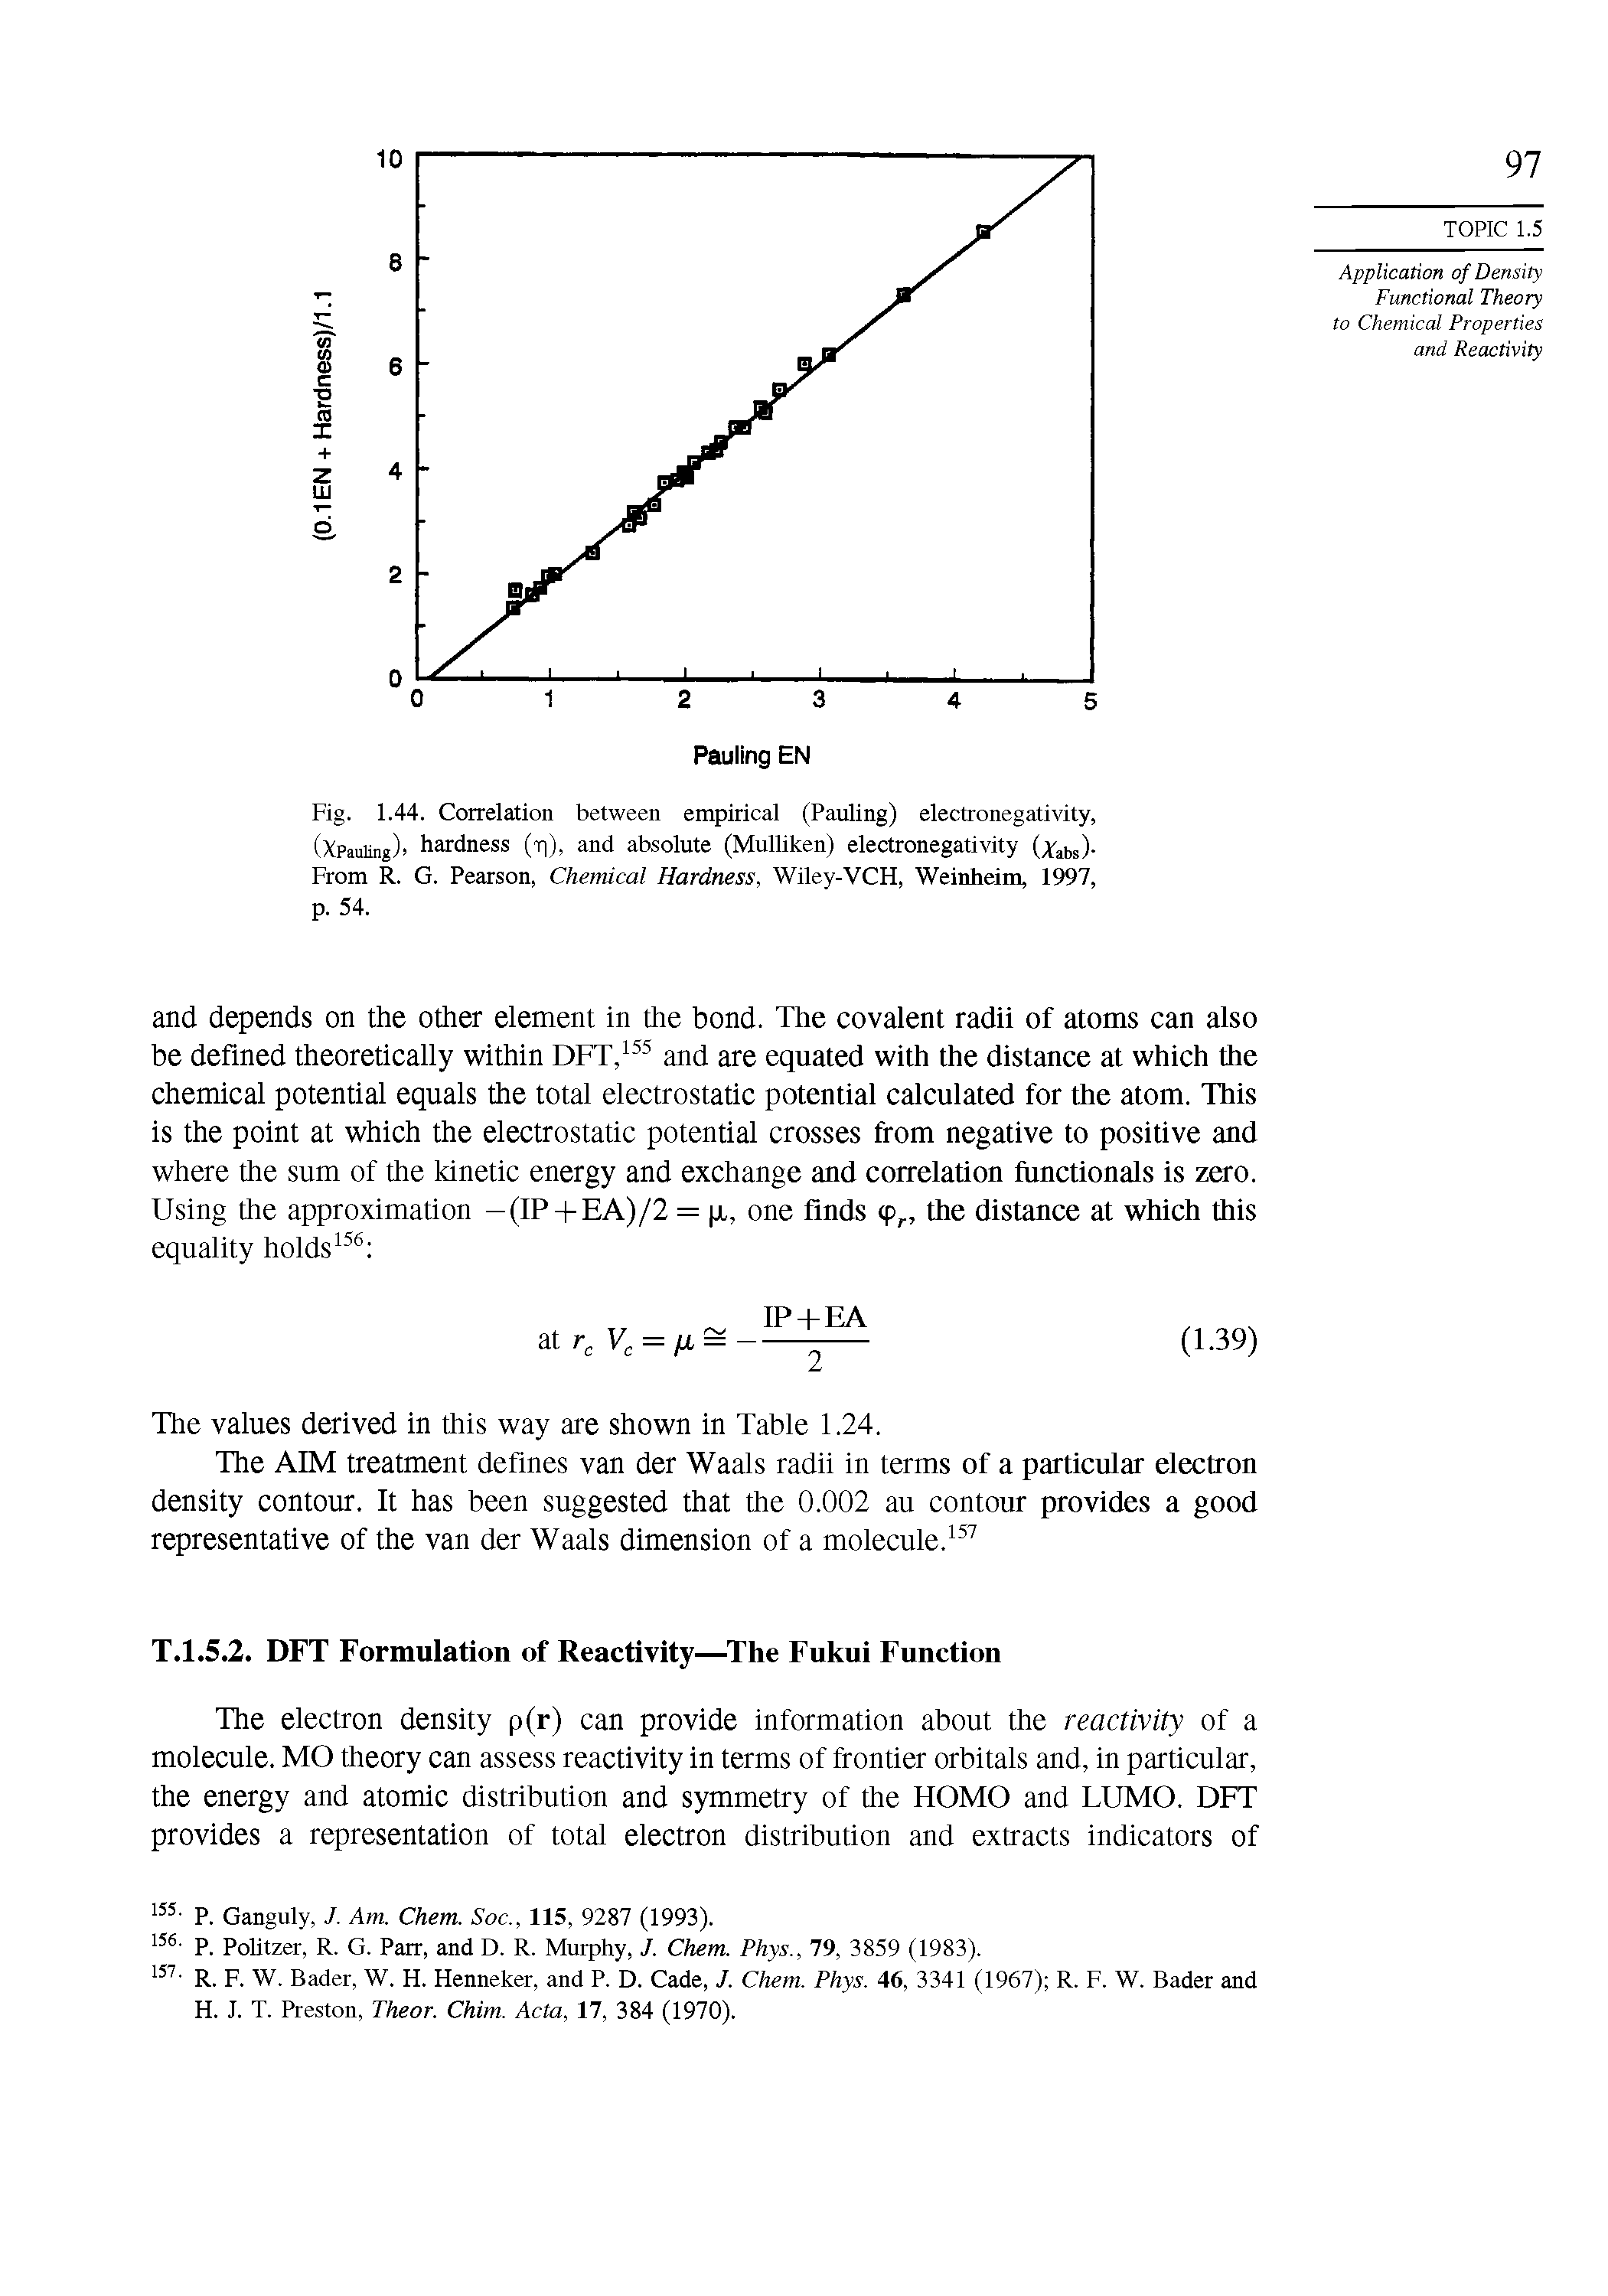 Fig. 1.44. Correlation between empirical (Pauling) electronegativity, (Xpauiing) hardness (t)), and absolute (Mulliken) electronegativity (A abs) From R. G. Pearson, Chemical Hardness, Wiley-VCH, Weinheim, 1997, p. 54.